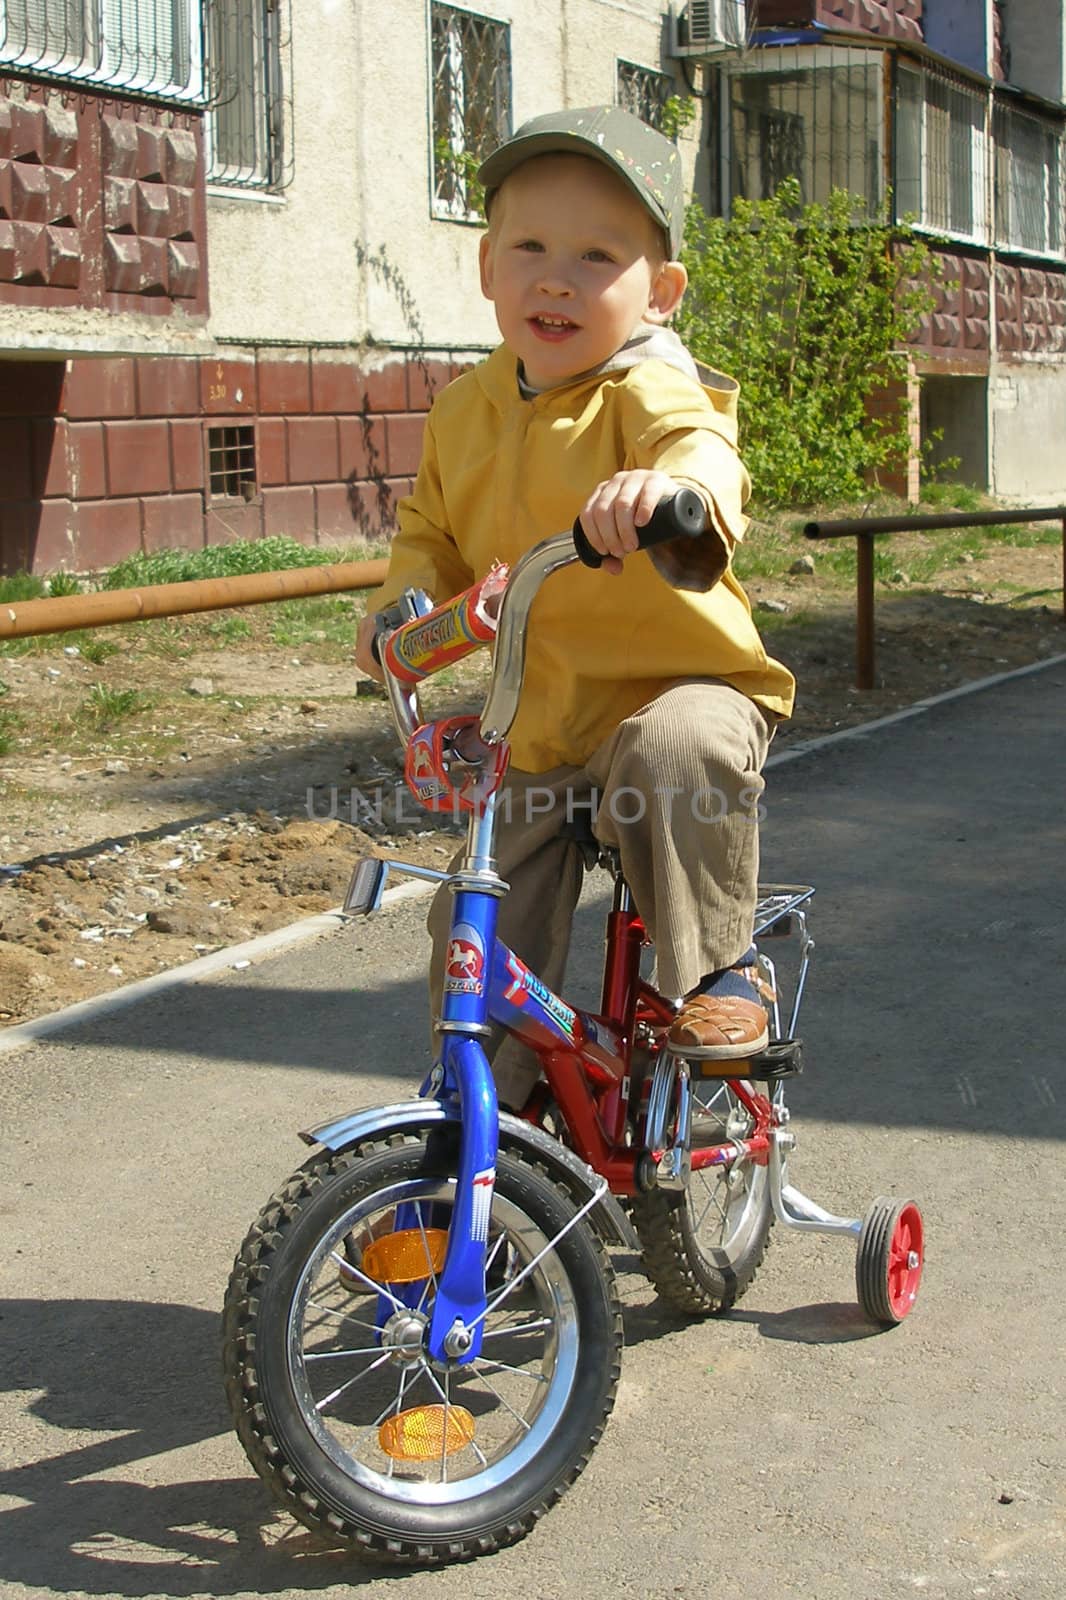 The boy goes for a drive on a bicycle